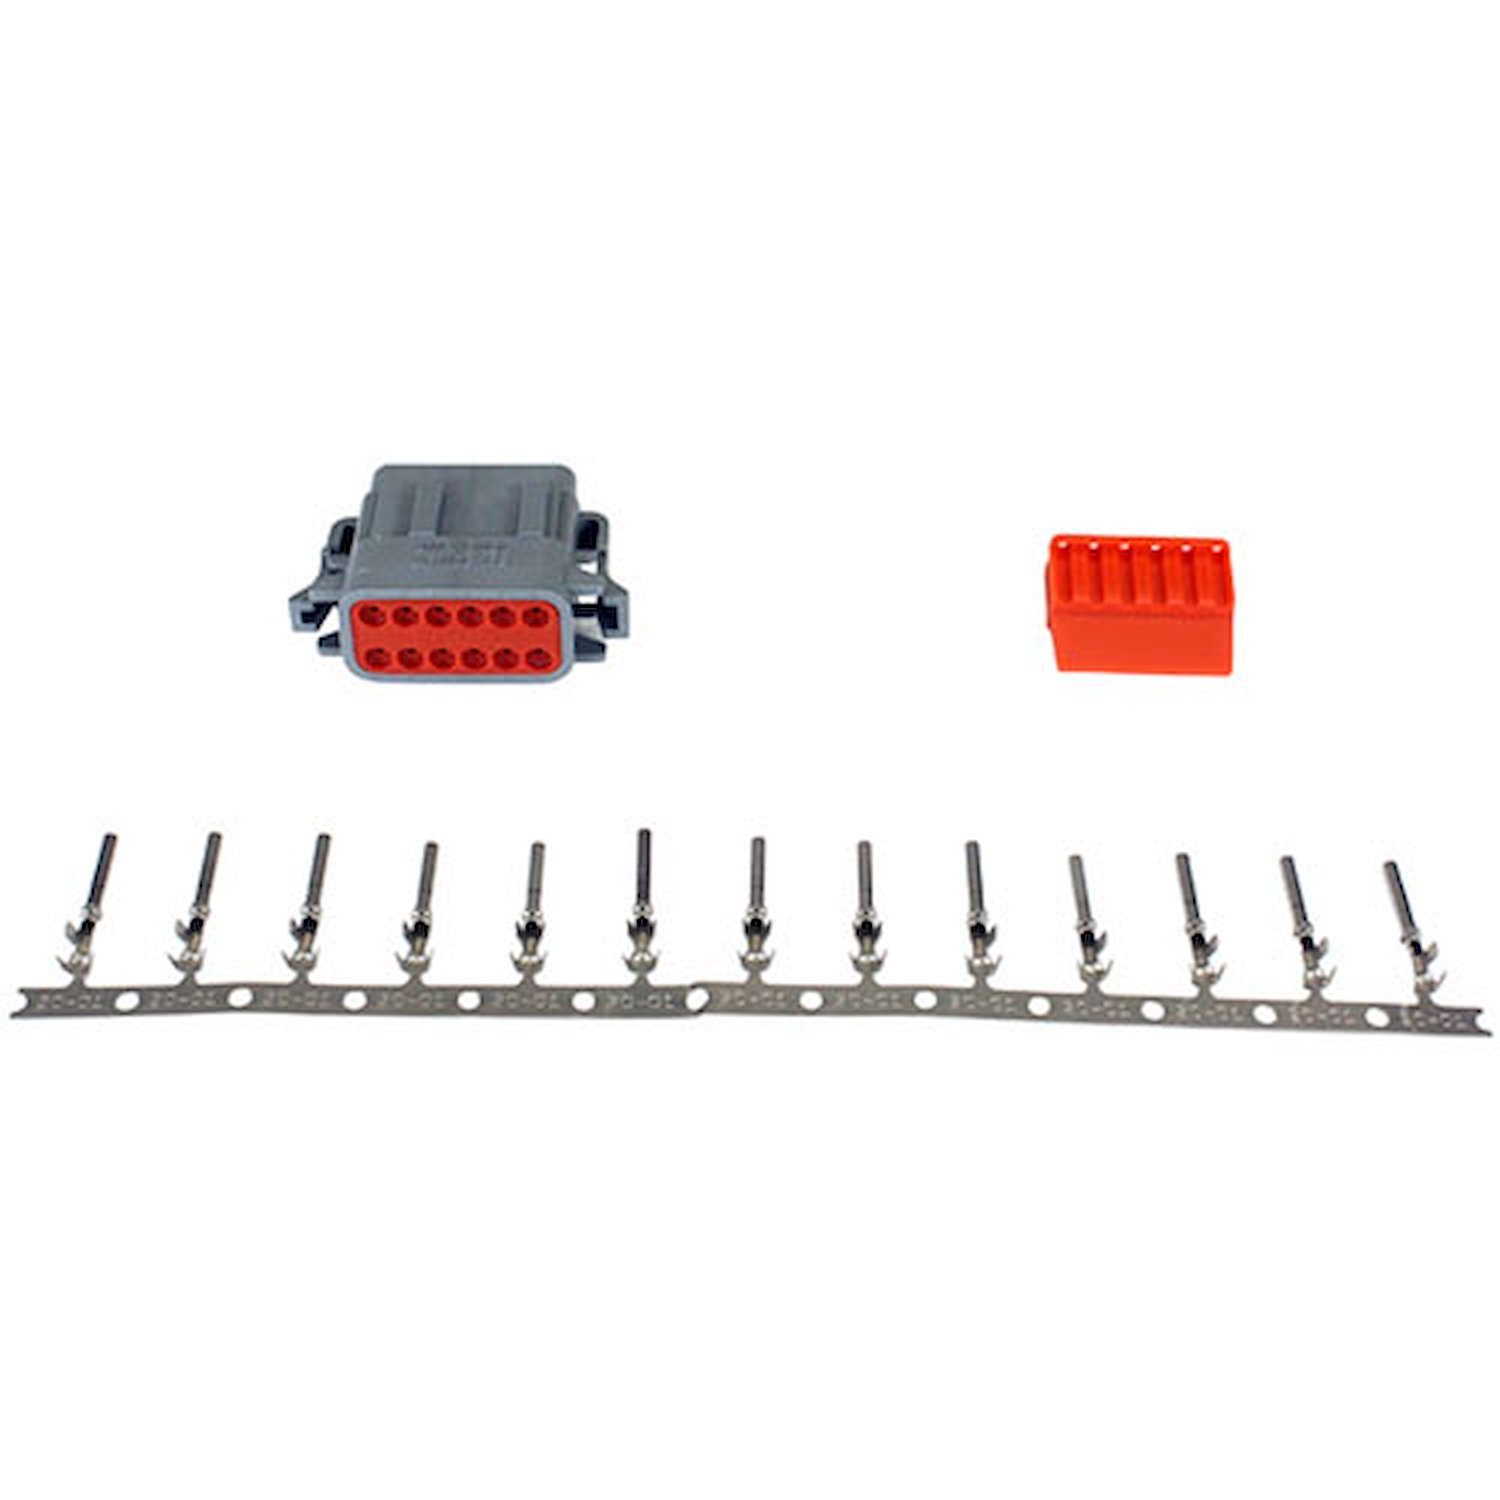 DTM-Style 12-Way Plug Connector Kit Includes Plug, Plug Wedge Lock And 13 Female Pins